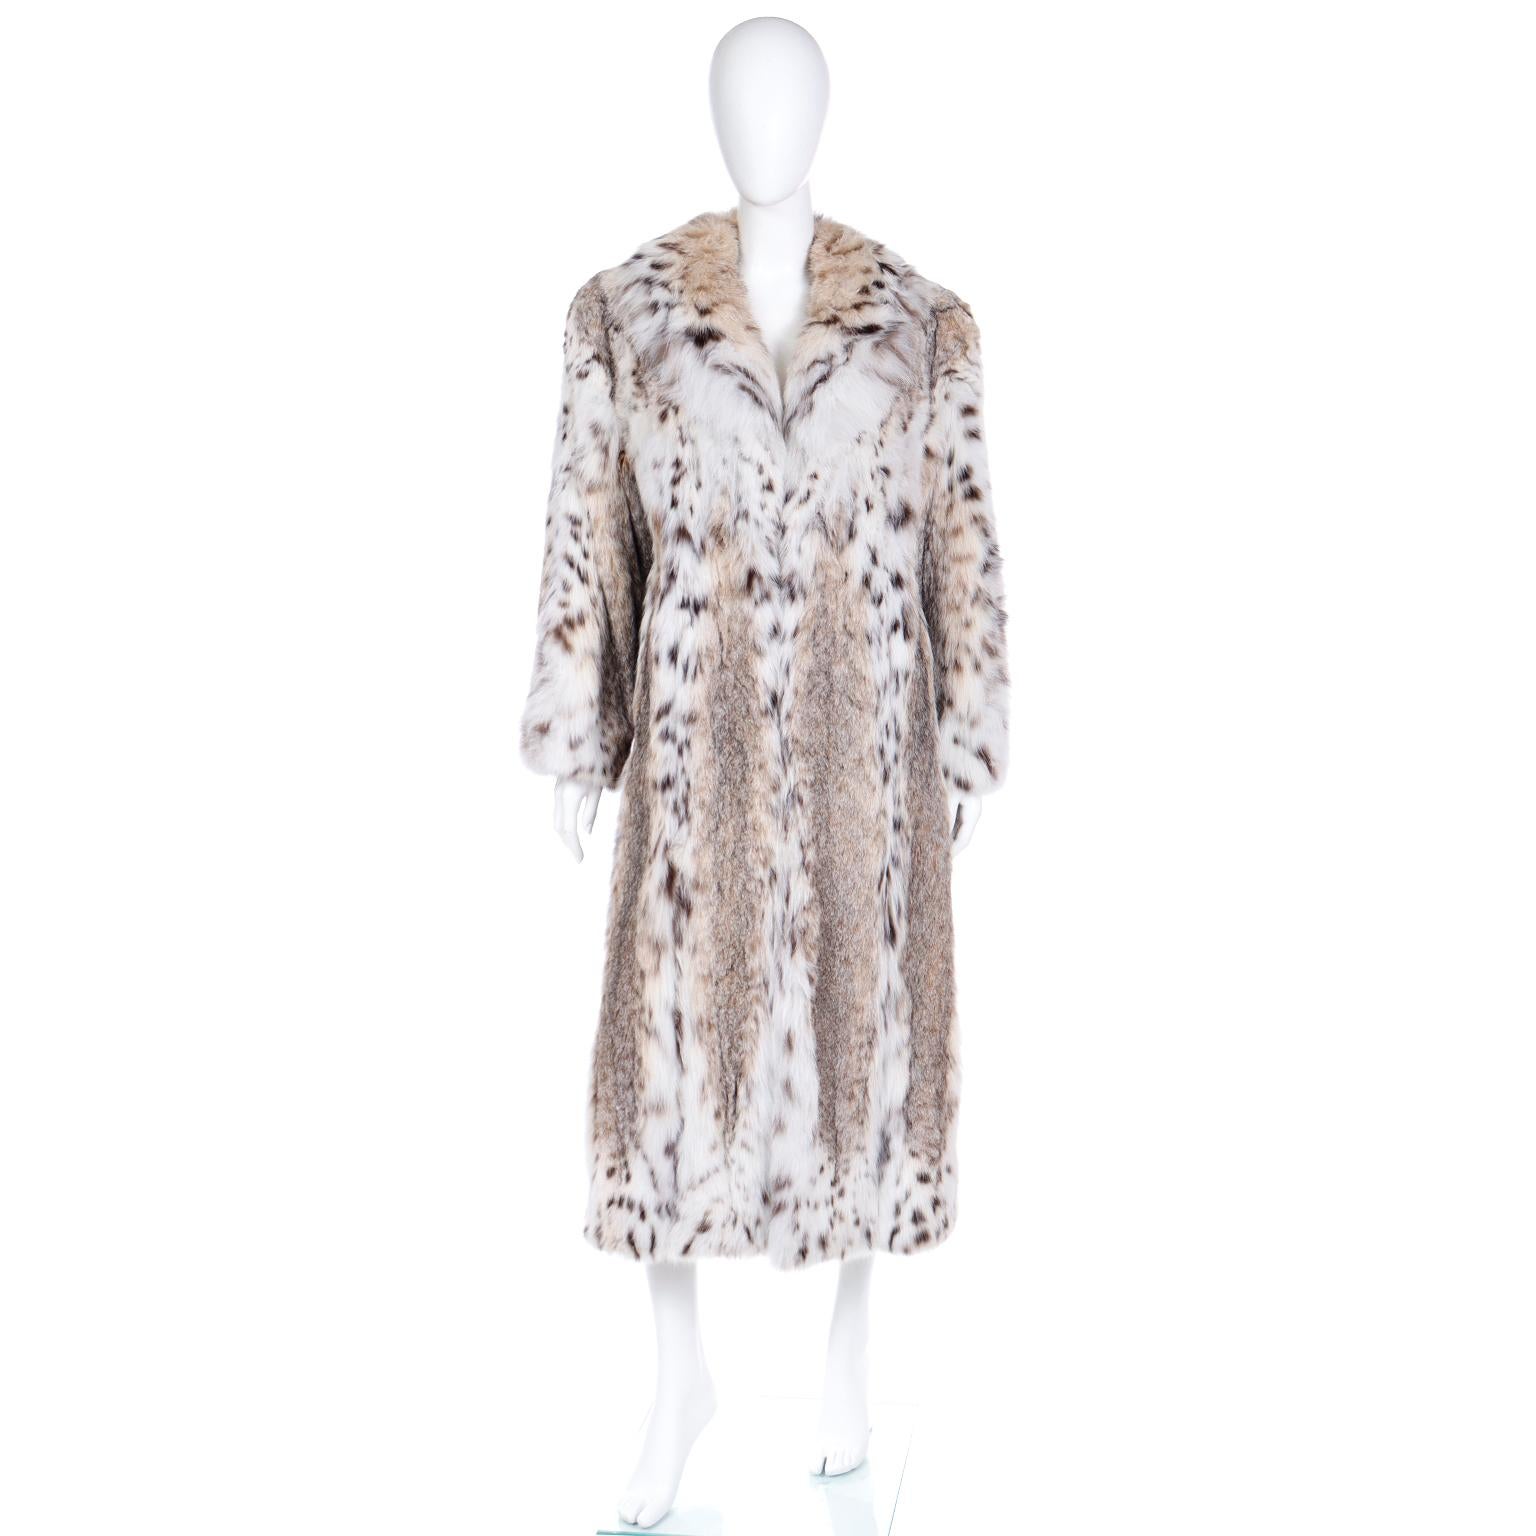 This gorgeous vintage Lynx fur coat comes from a woman who had incredible vintage designer clothing from the 1970's and 1980's. We purchased her estate of clothing and have loved selling every piece because each one was so special!
This beautiful